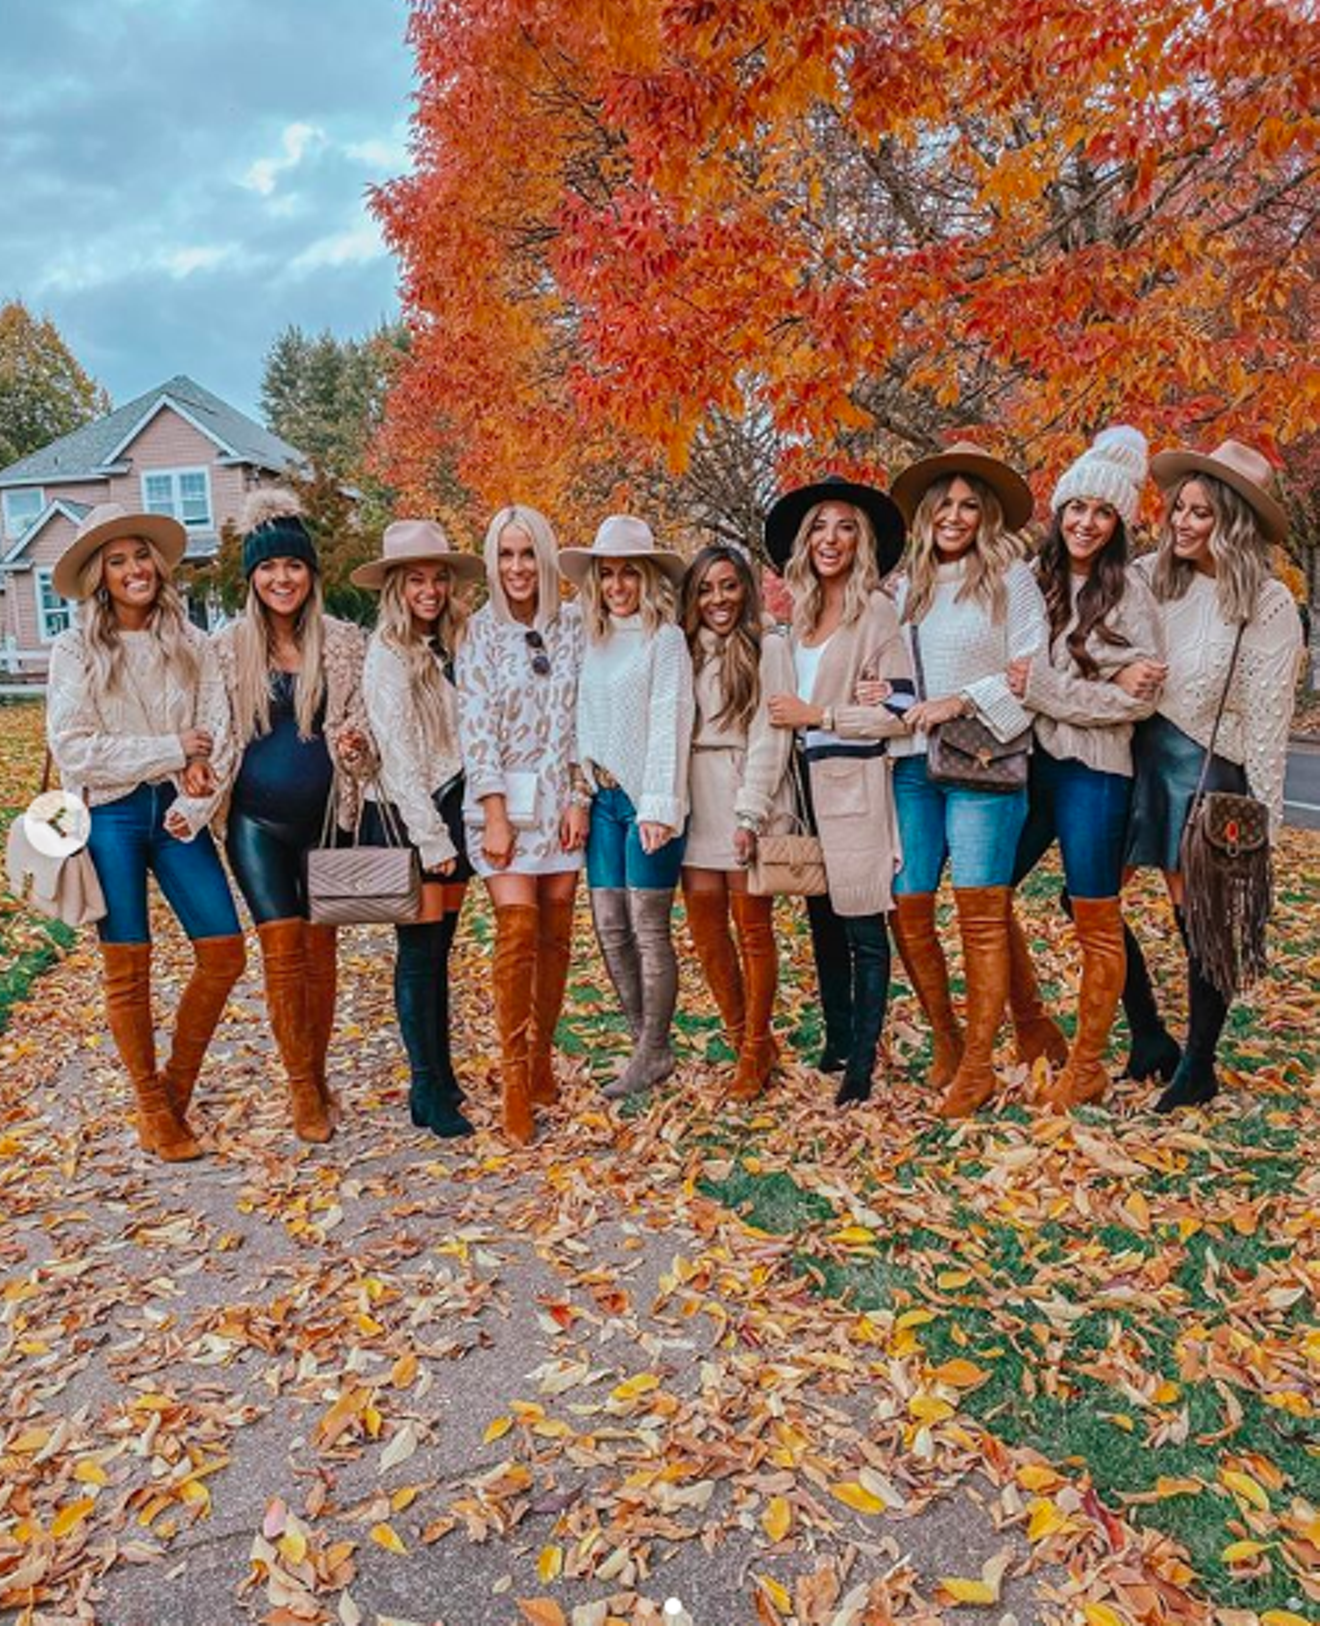 Pumpkin spice up your life. A Dallas infuencer goes viral for a group shot of women wearing boots and sweaters.